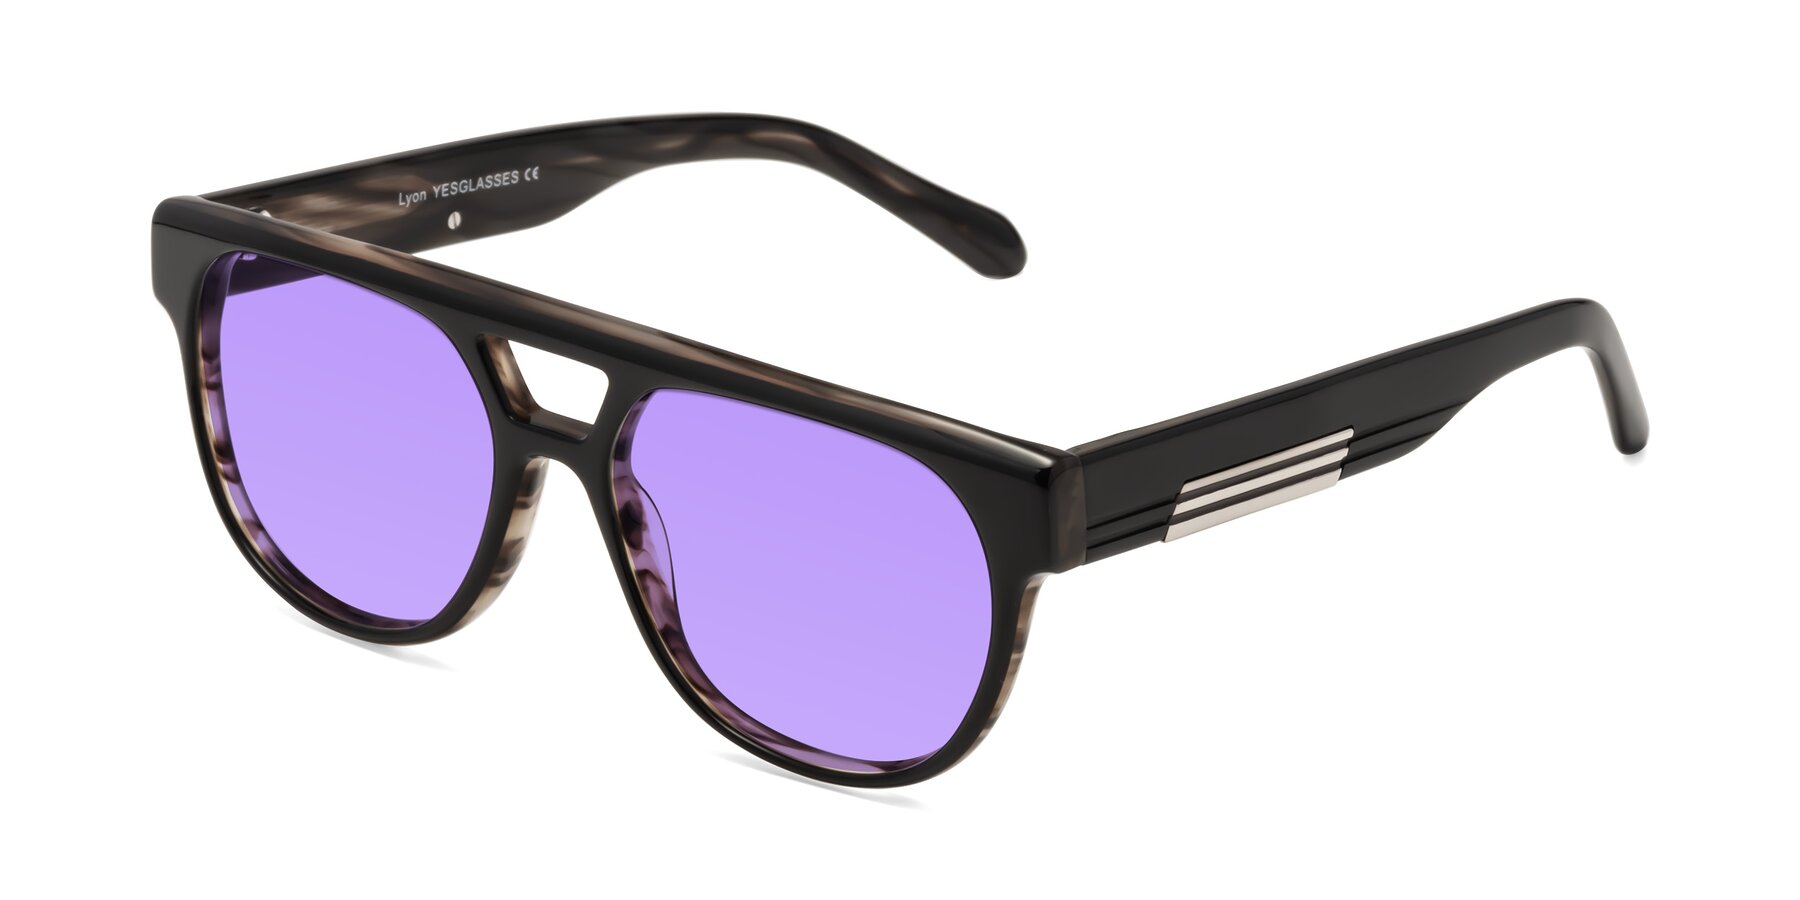 Angle of Lyon in Black-Brown with Medium Purple Tinted Lenses